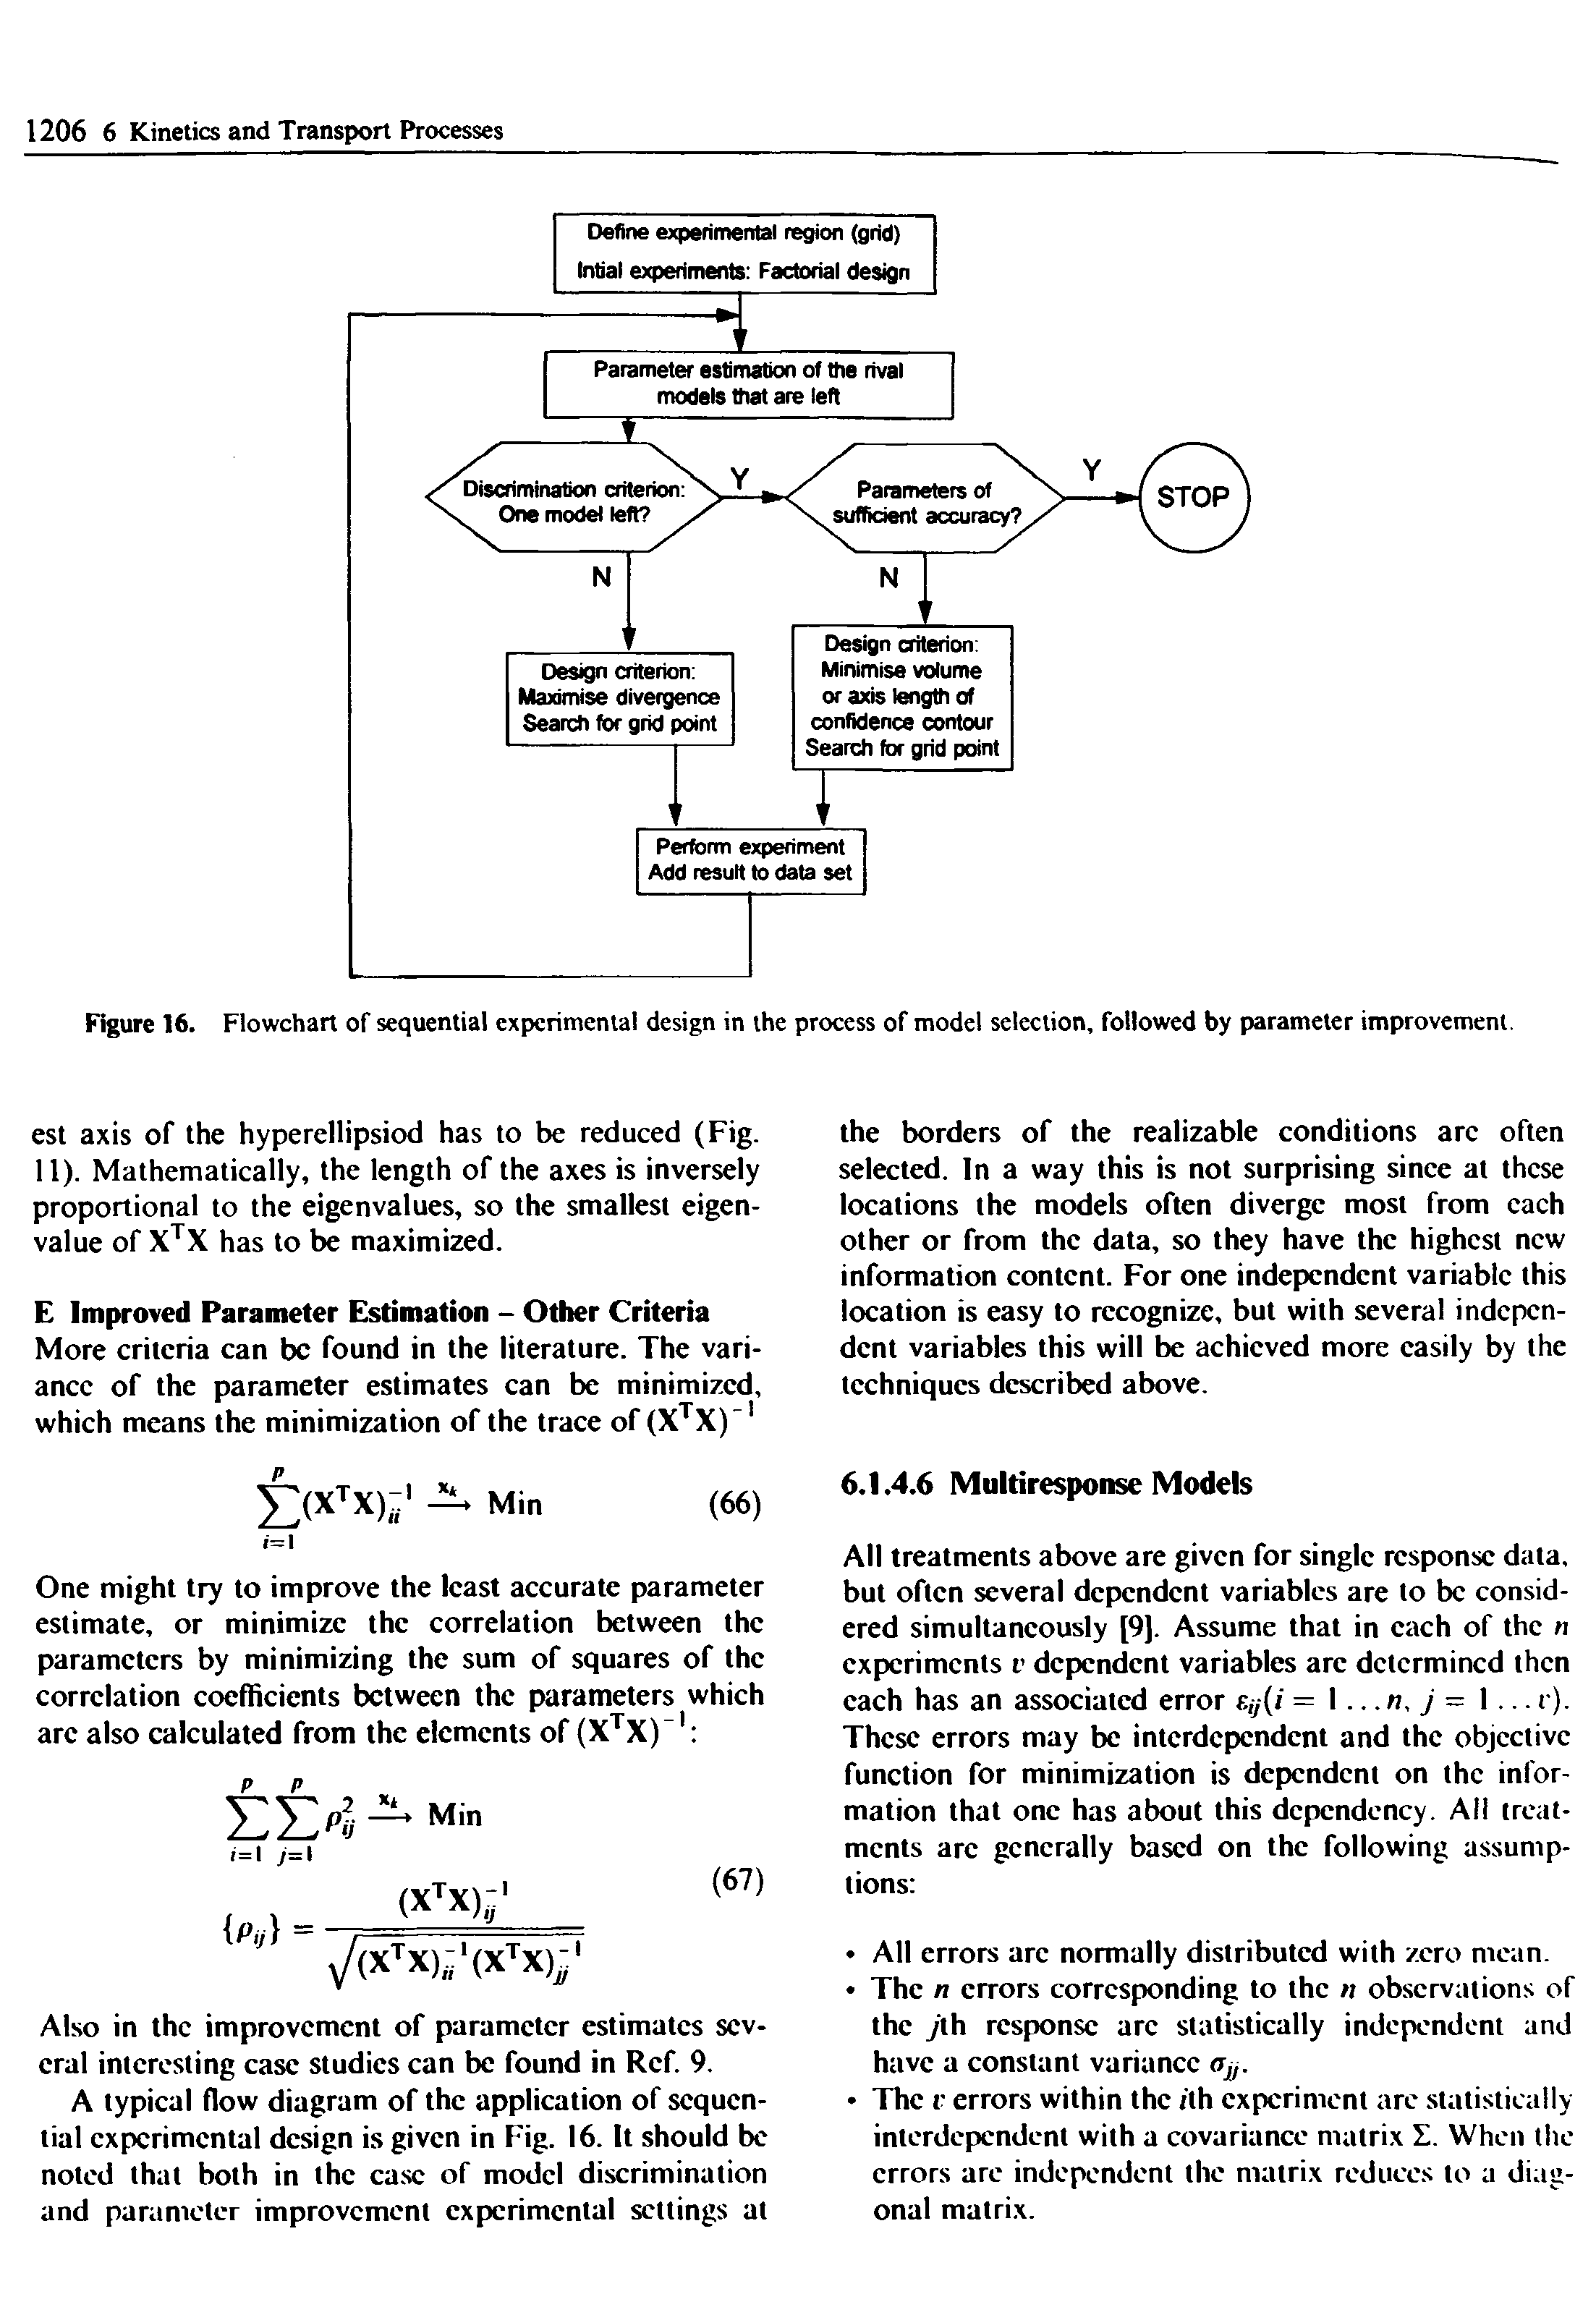 Figure 16. Flowchart of sequential experimental design in the process of model selection, followed by parameter improvement.